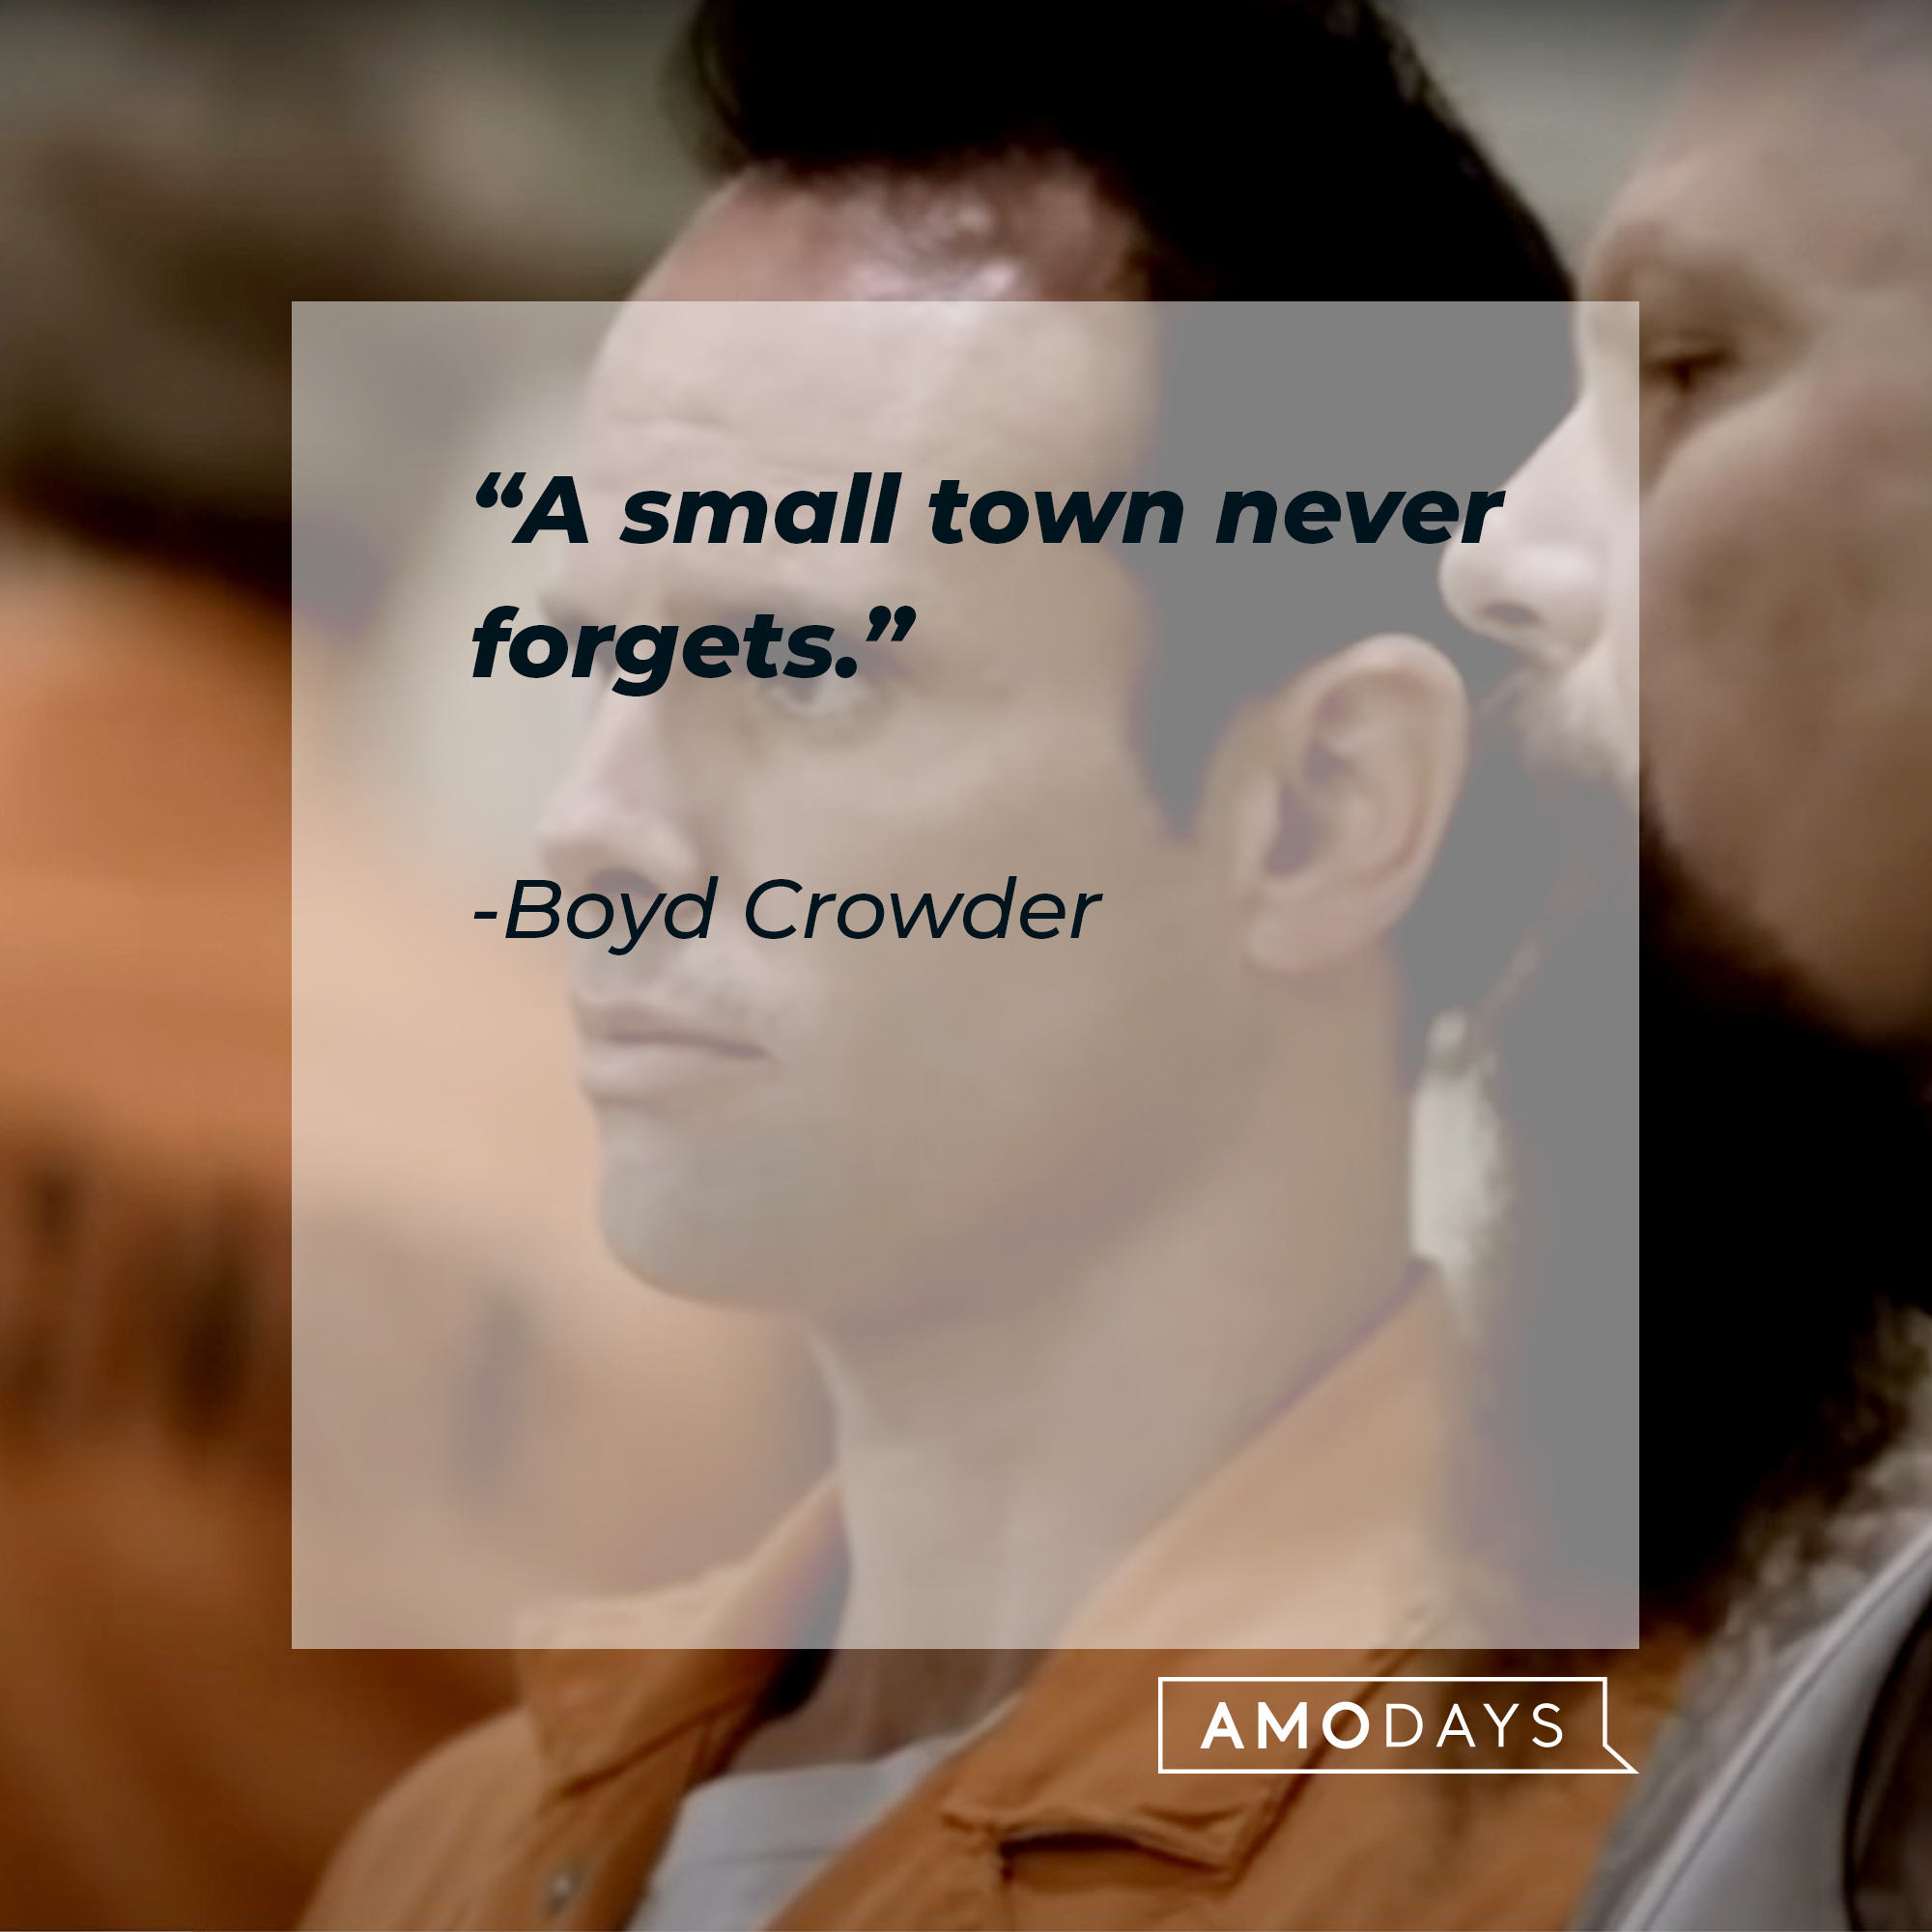 An image of  Boyd Crowder with his quote: “A small town never forgets.” | Source:  youtube.com/FXNetworks